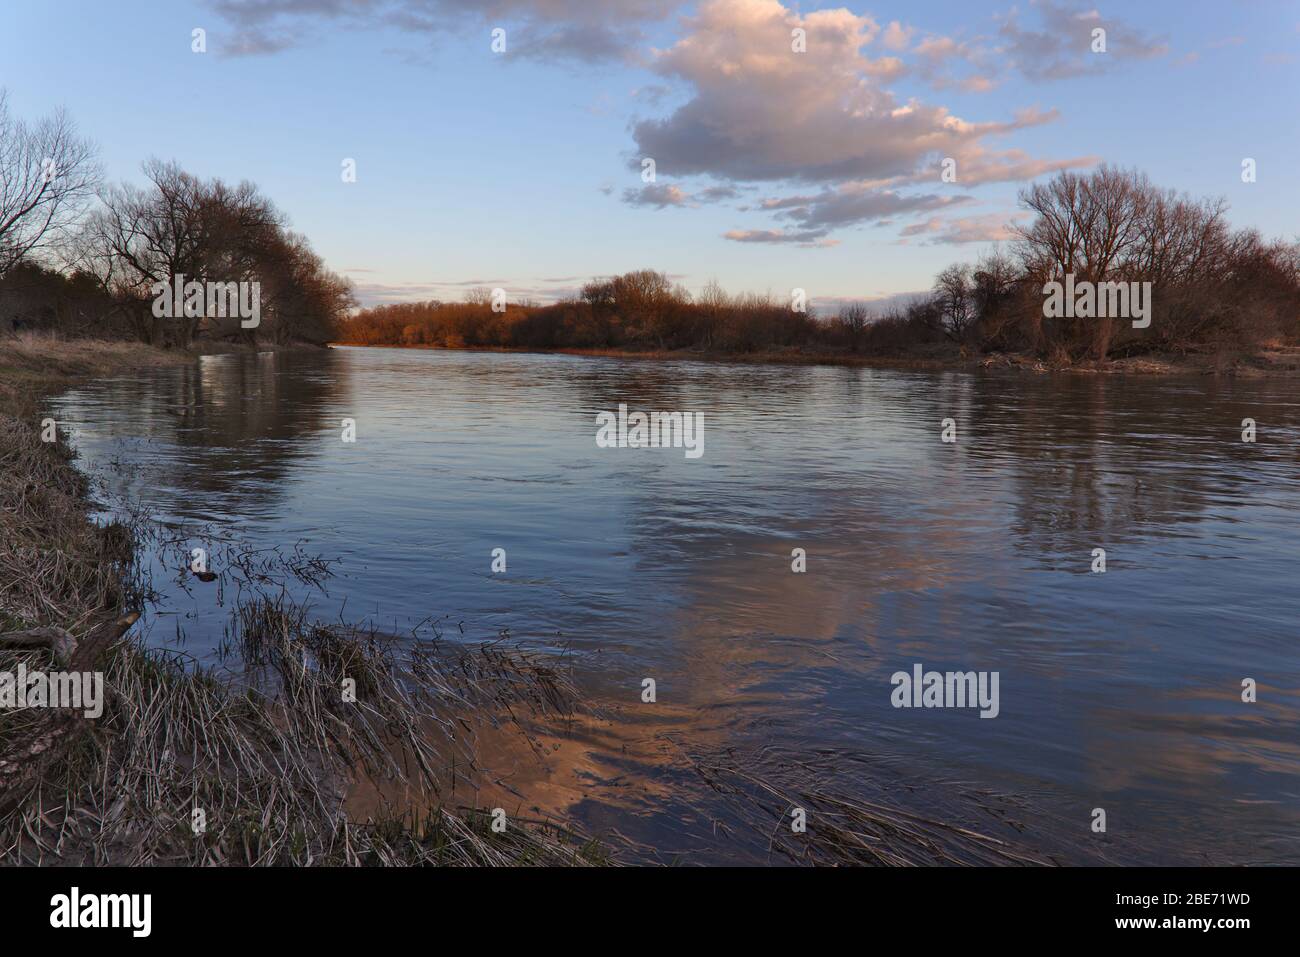 The Grand River at sunset in early spring. Shot in Waterloo, Ontario, Canada. Stock Photo